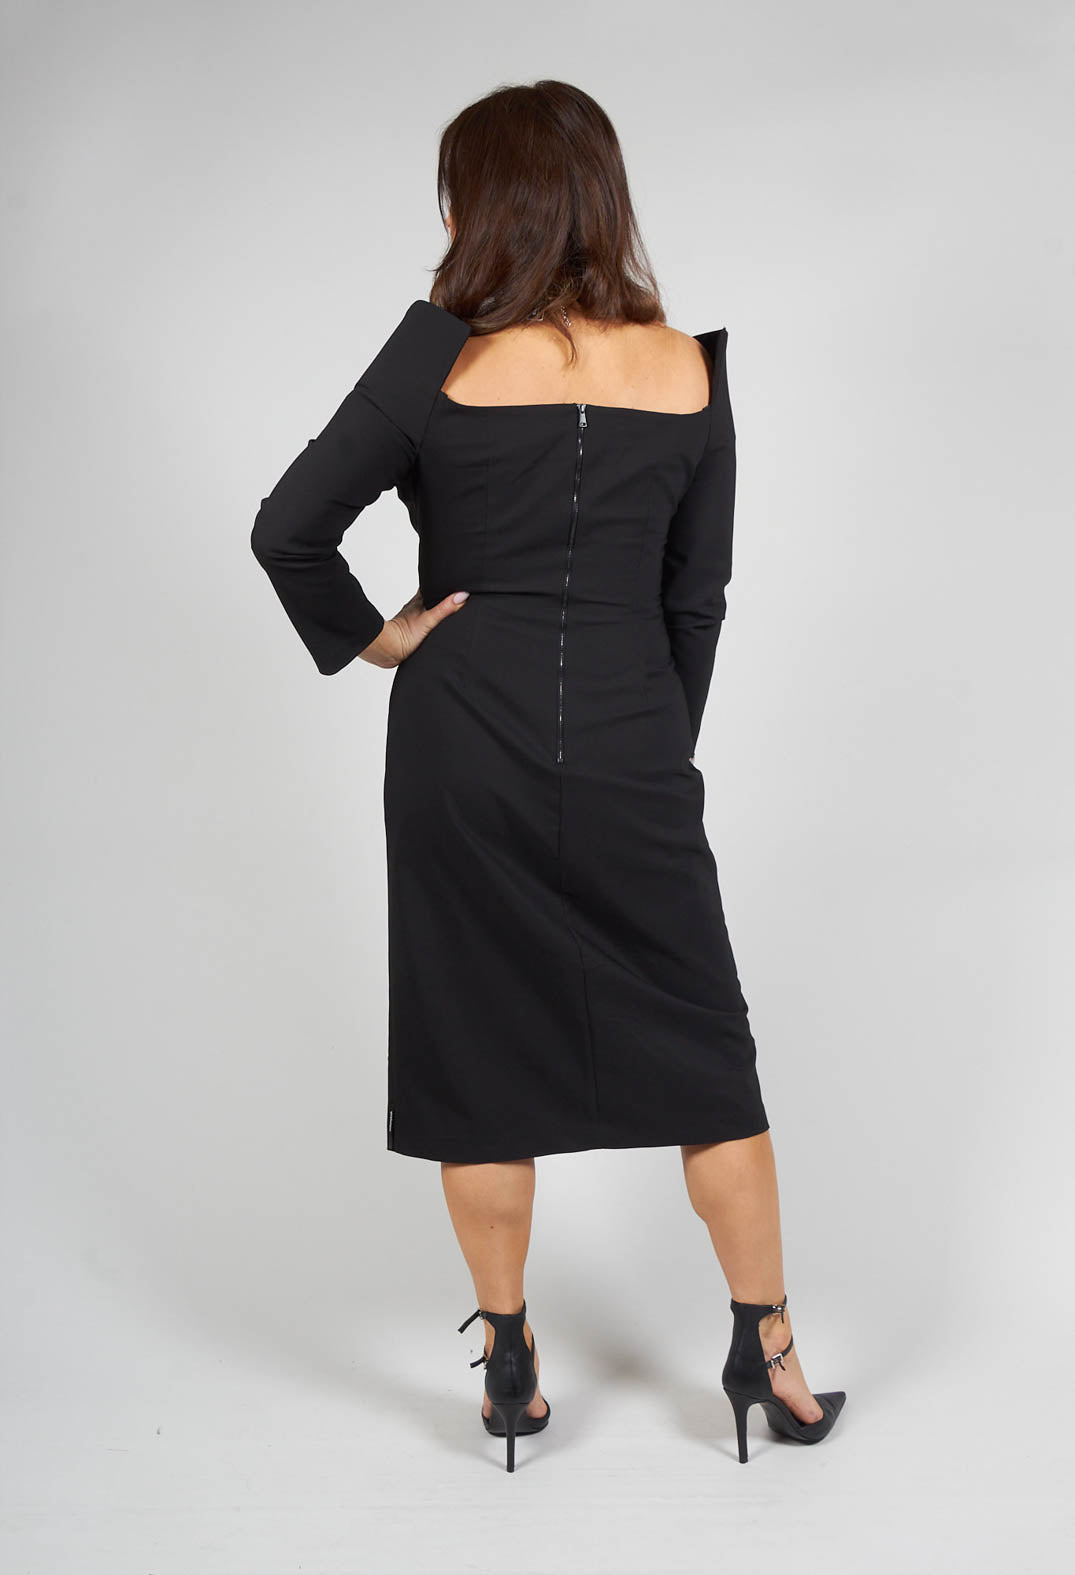 Strappy Dress with Shoulder Pad Detail in Black